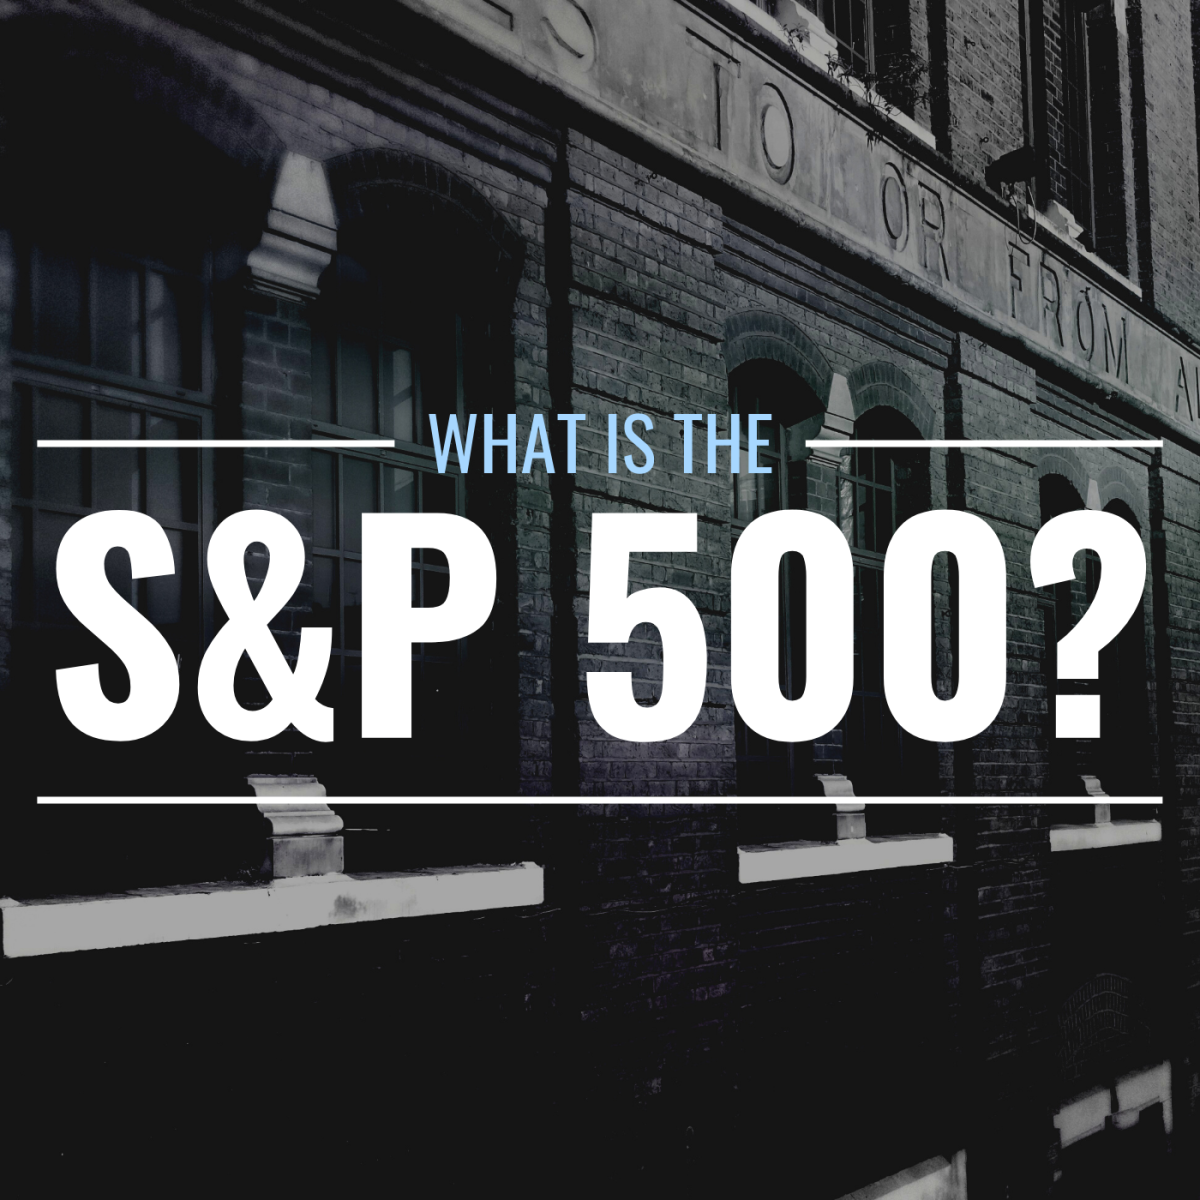 Darkened photo of an old building with text overlay that reads "What Is the S&P 500?"